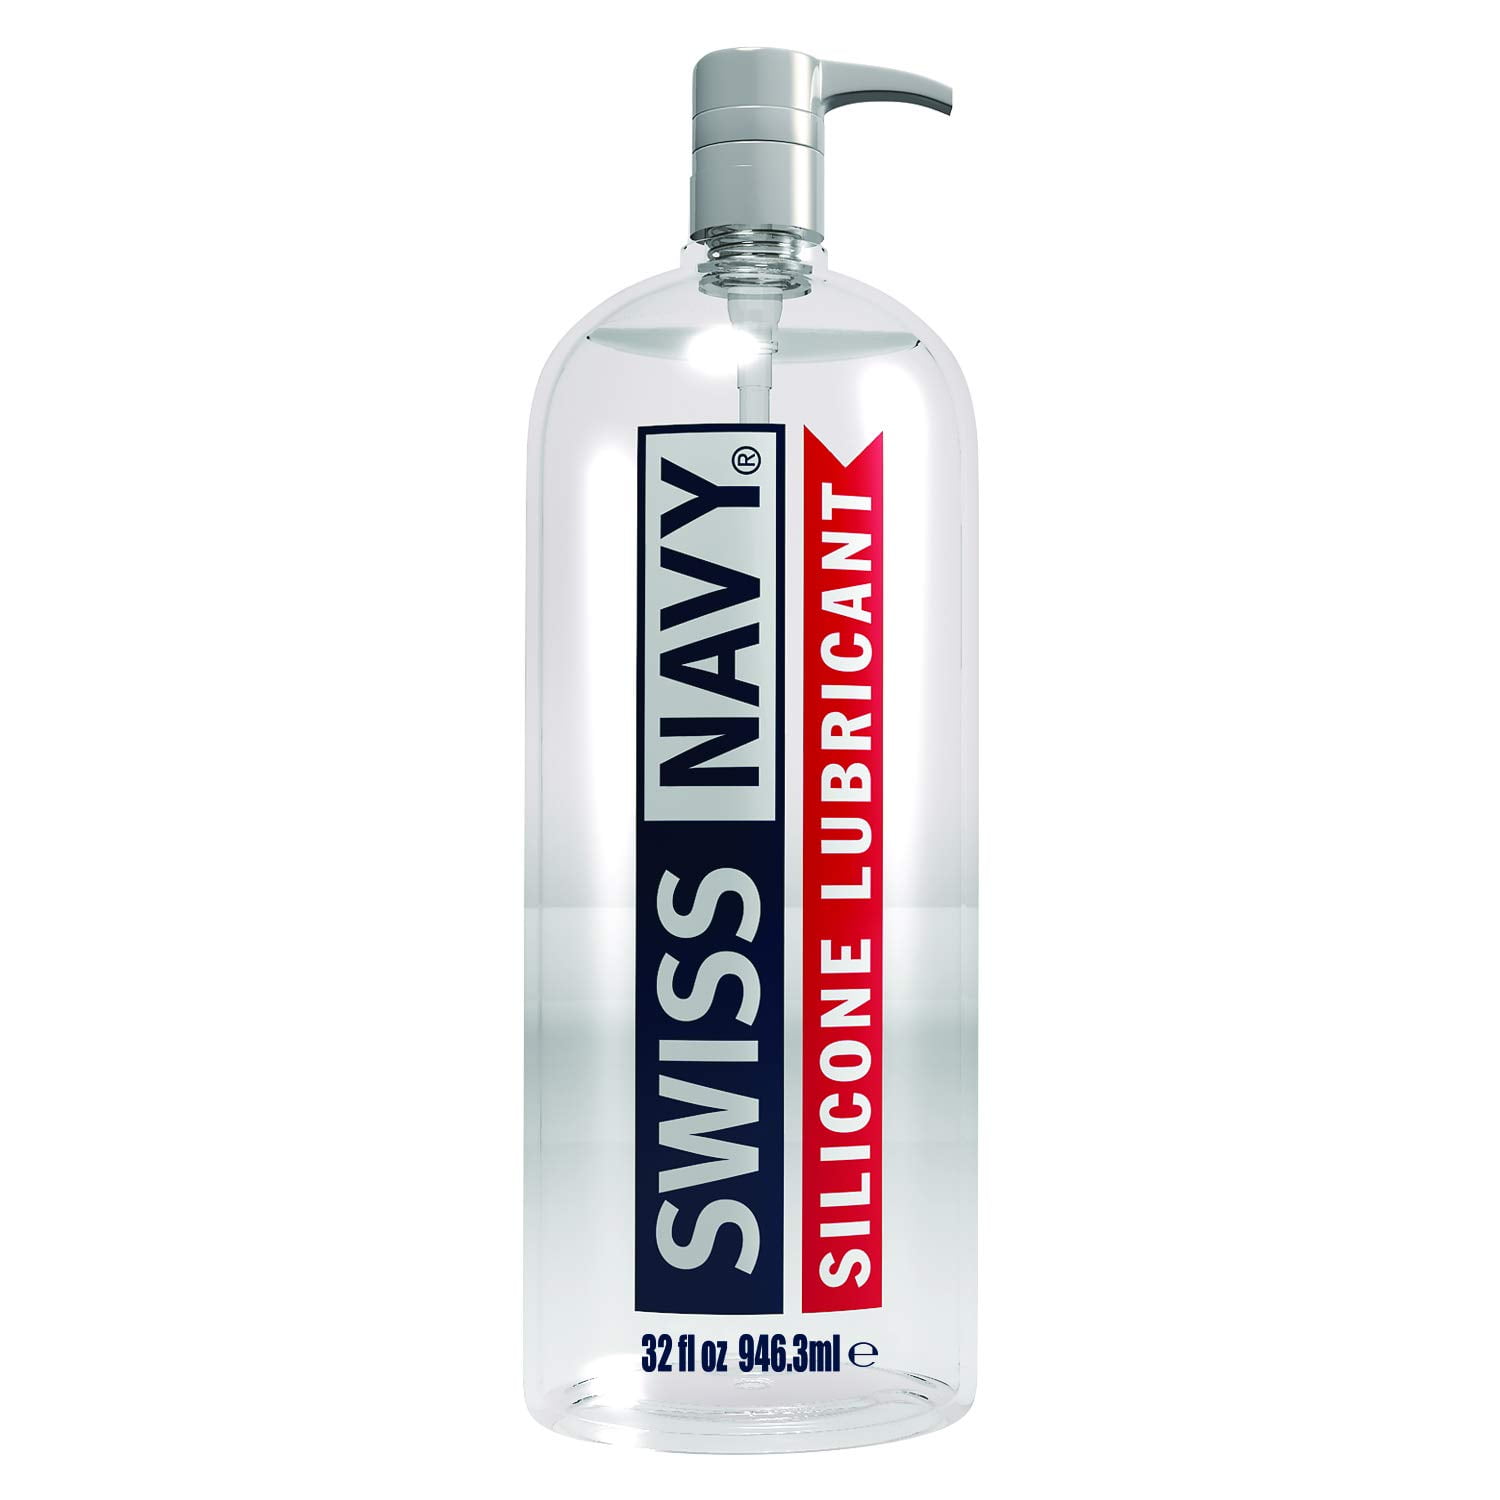 Swiss Navy Premium Silicone Sex Lubricant, 32 Ounce, Lube for Men, Women & Couples. MD Science Lab